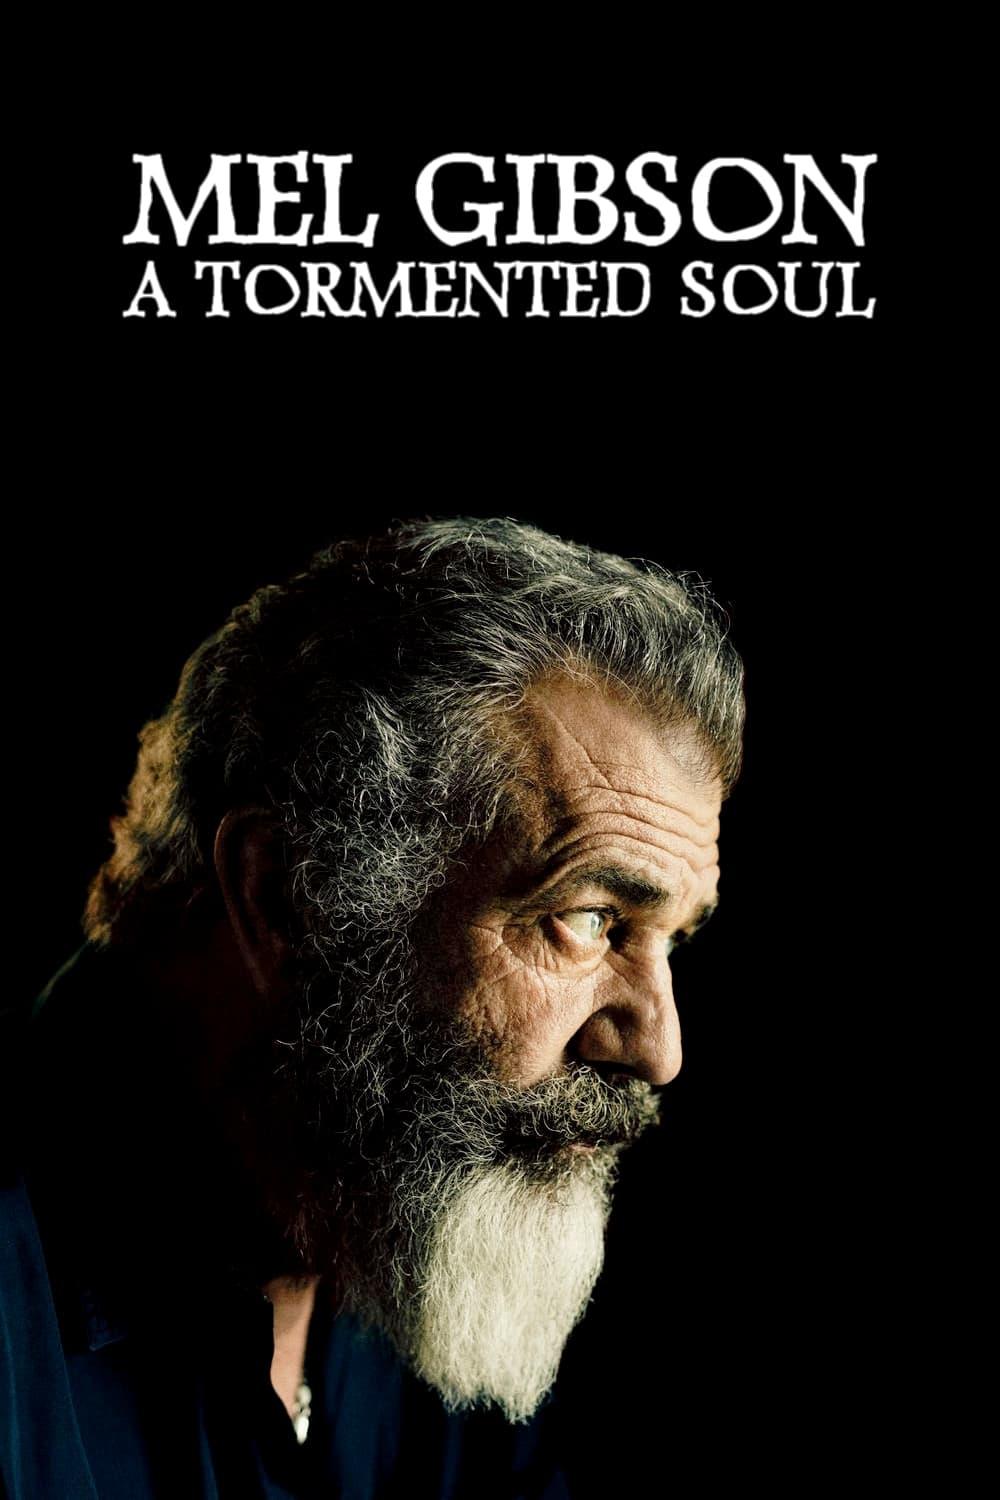 Mel Gibson: A Tormented Soul poster